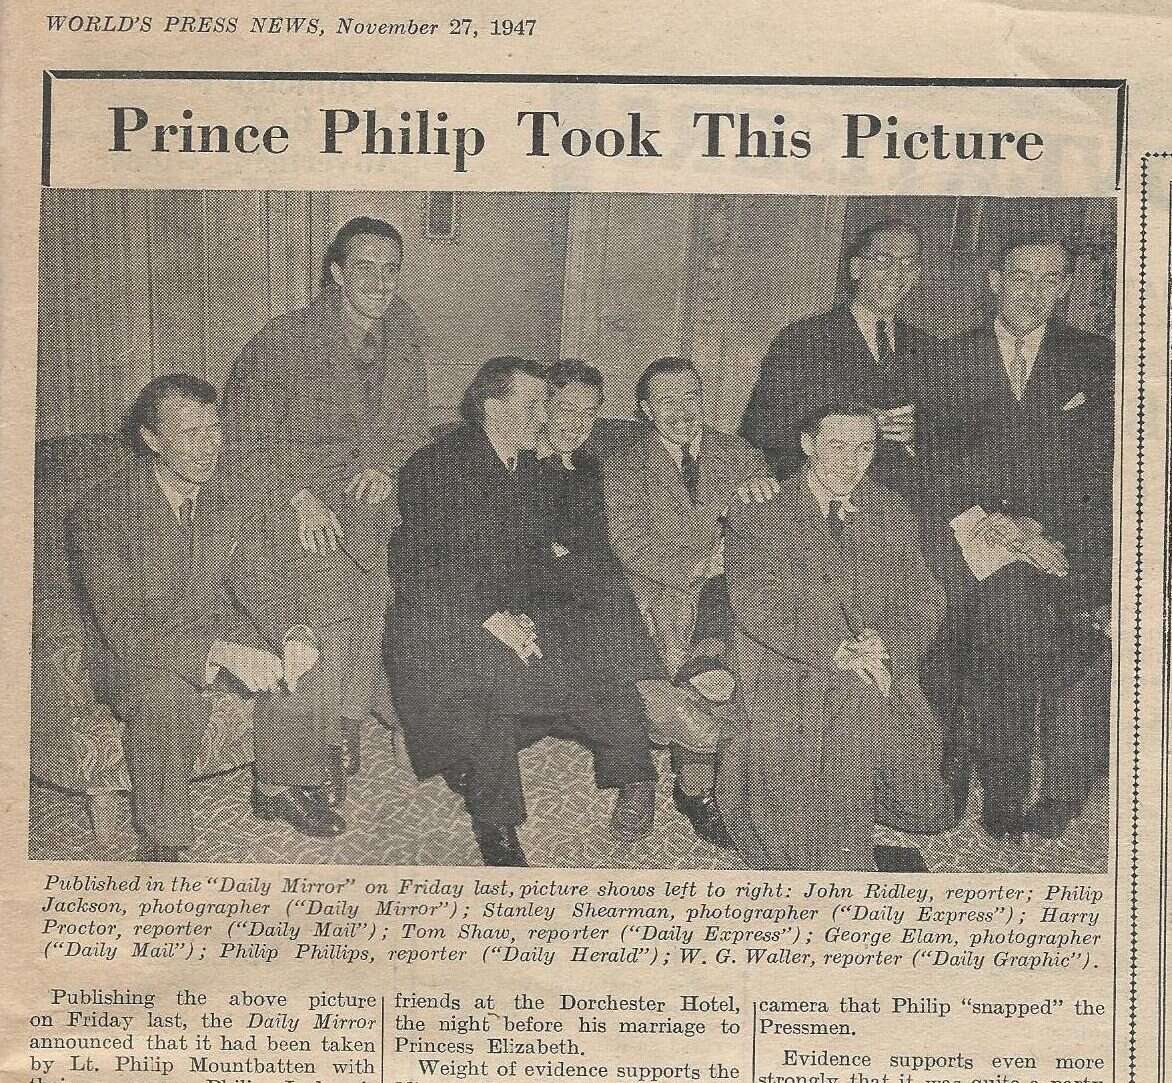 Remembering when Fleet Street journalists blagged their way into Prince Philip's stag do